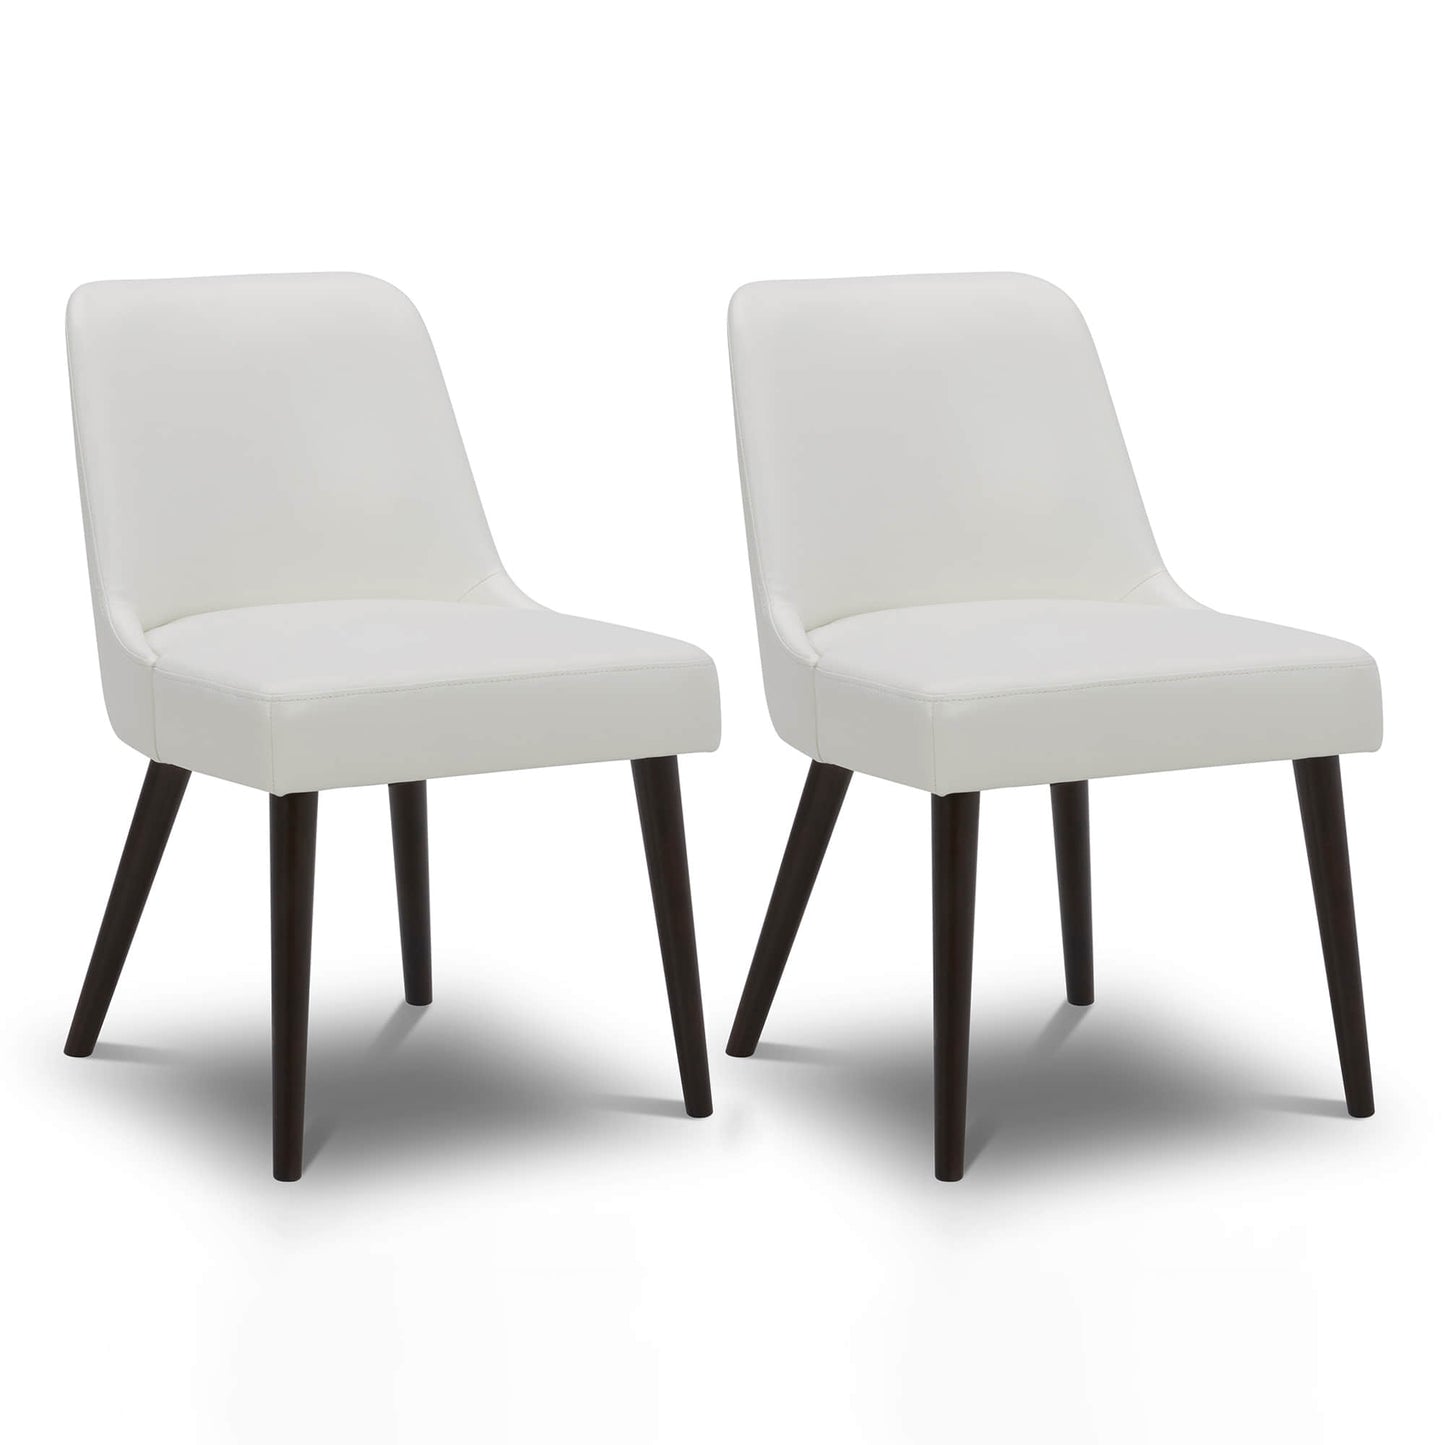 CHITA LIVING-Rhett Dining Chair (Set of 2)-Dining Chairs-Faux Leather-Off White-